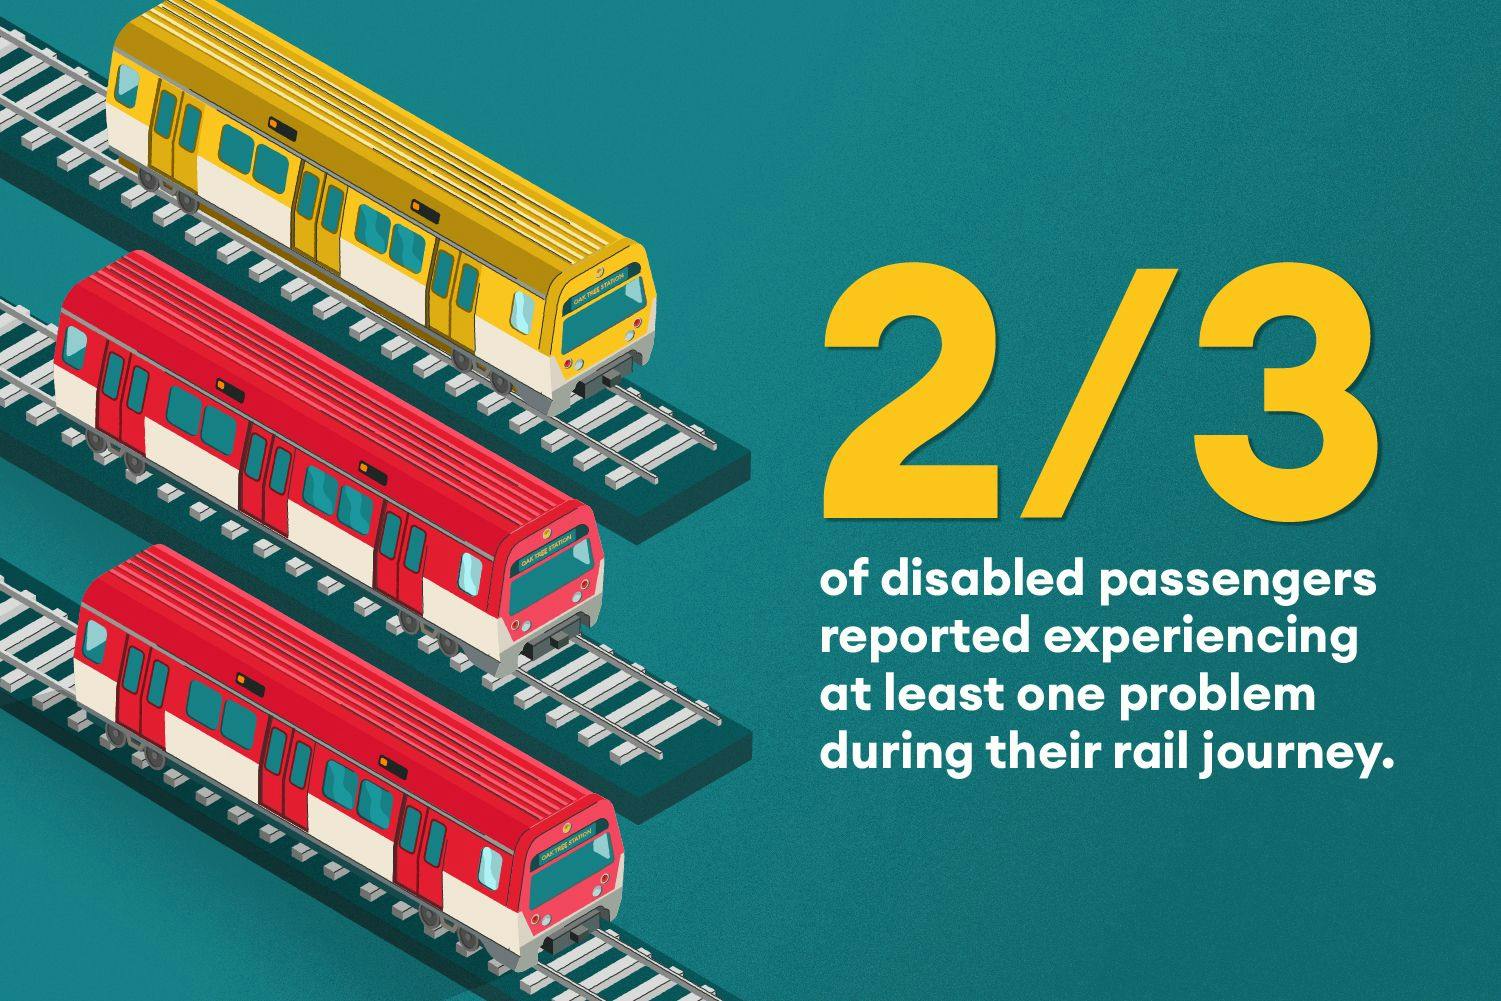 2/3 of disabled passengers reported experiencing at least one problem during their rail journey.